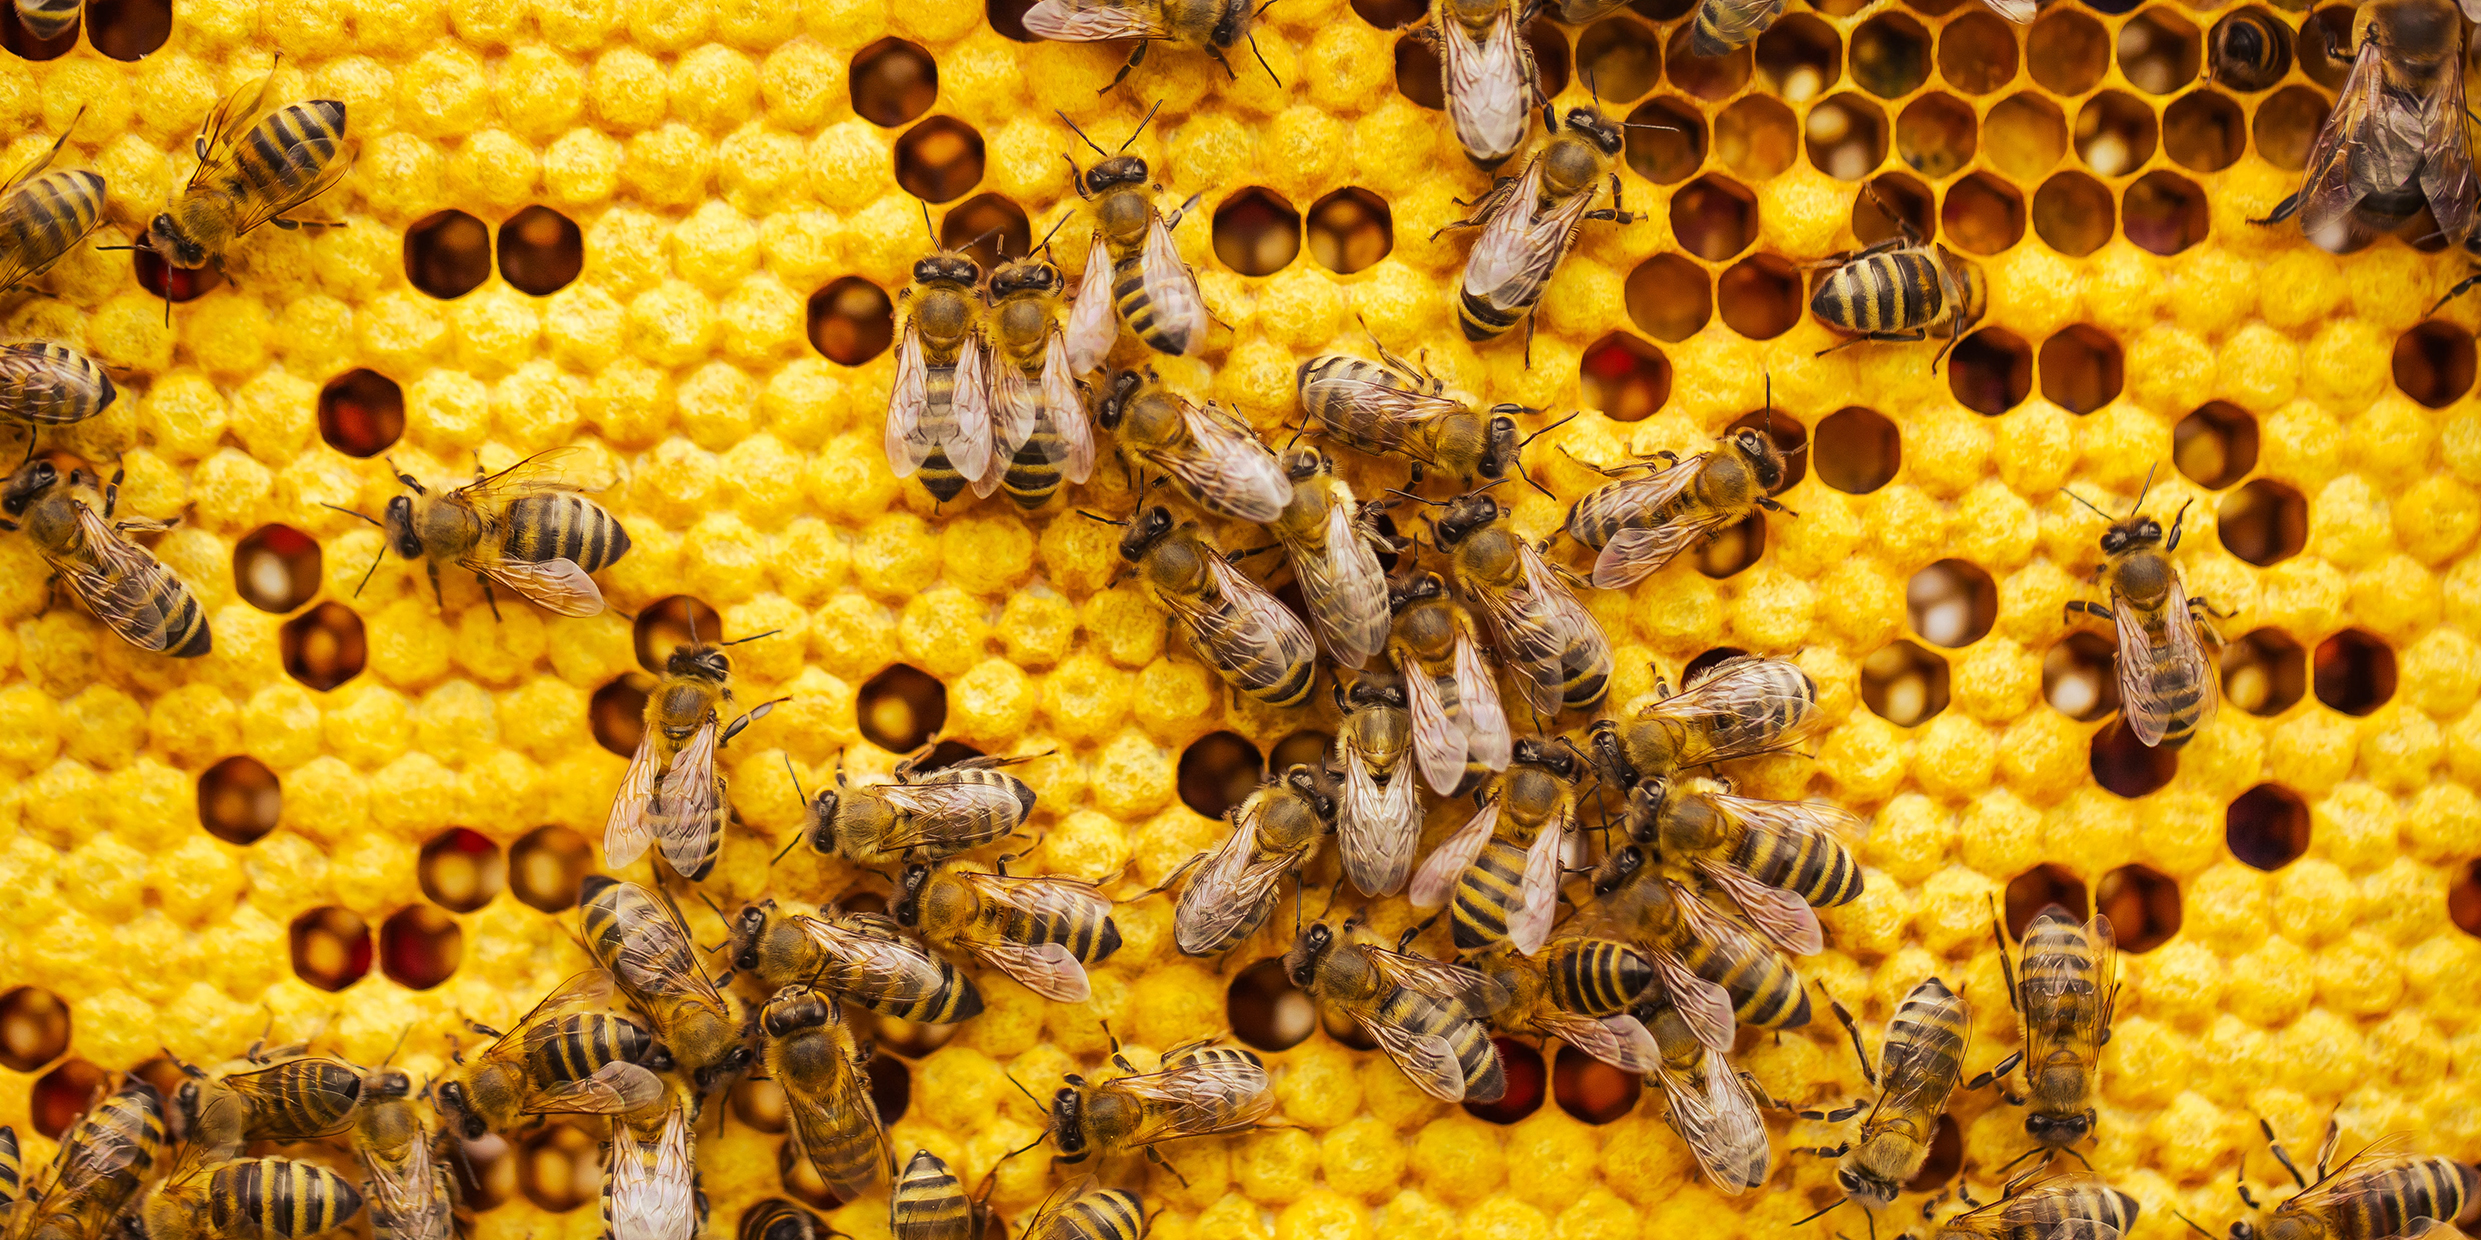 Image of bees on the surface of a honeycomb